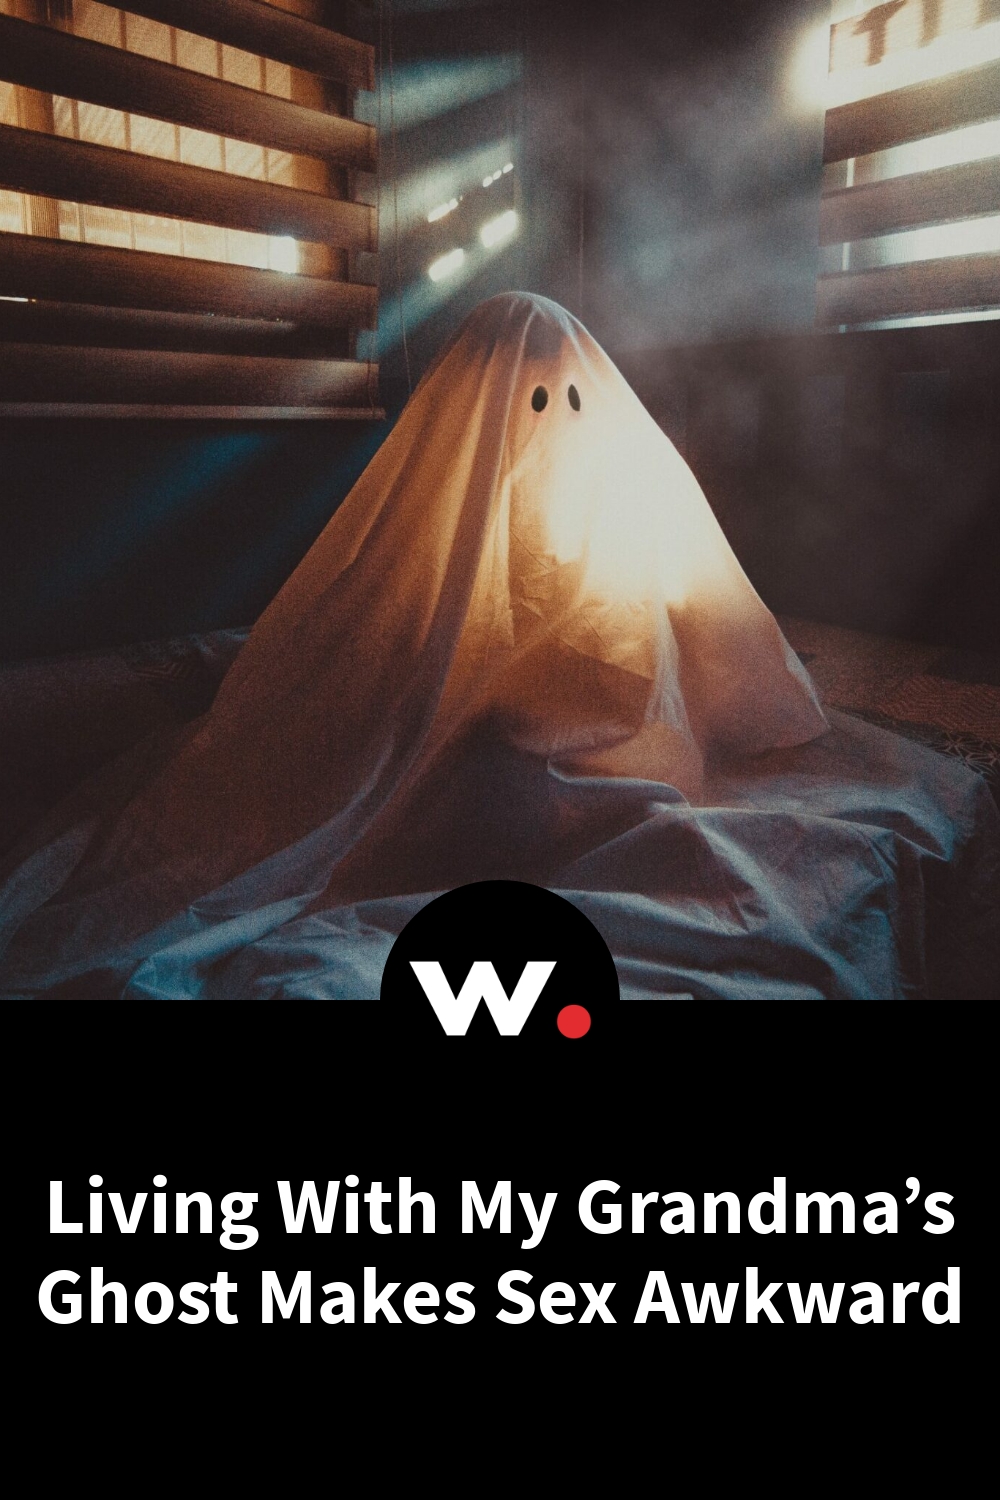 Living With My Grandma’s Ghost Makes Sex Awkward